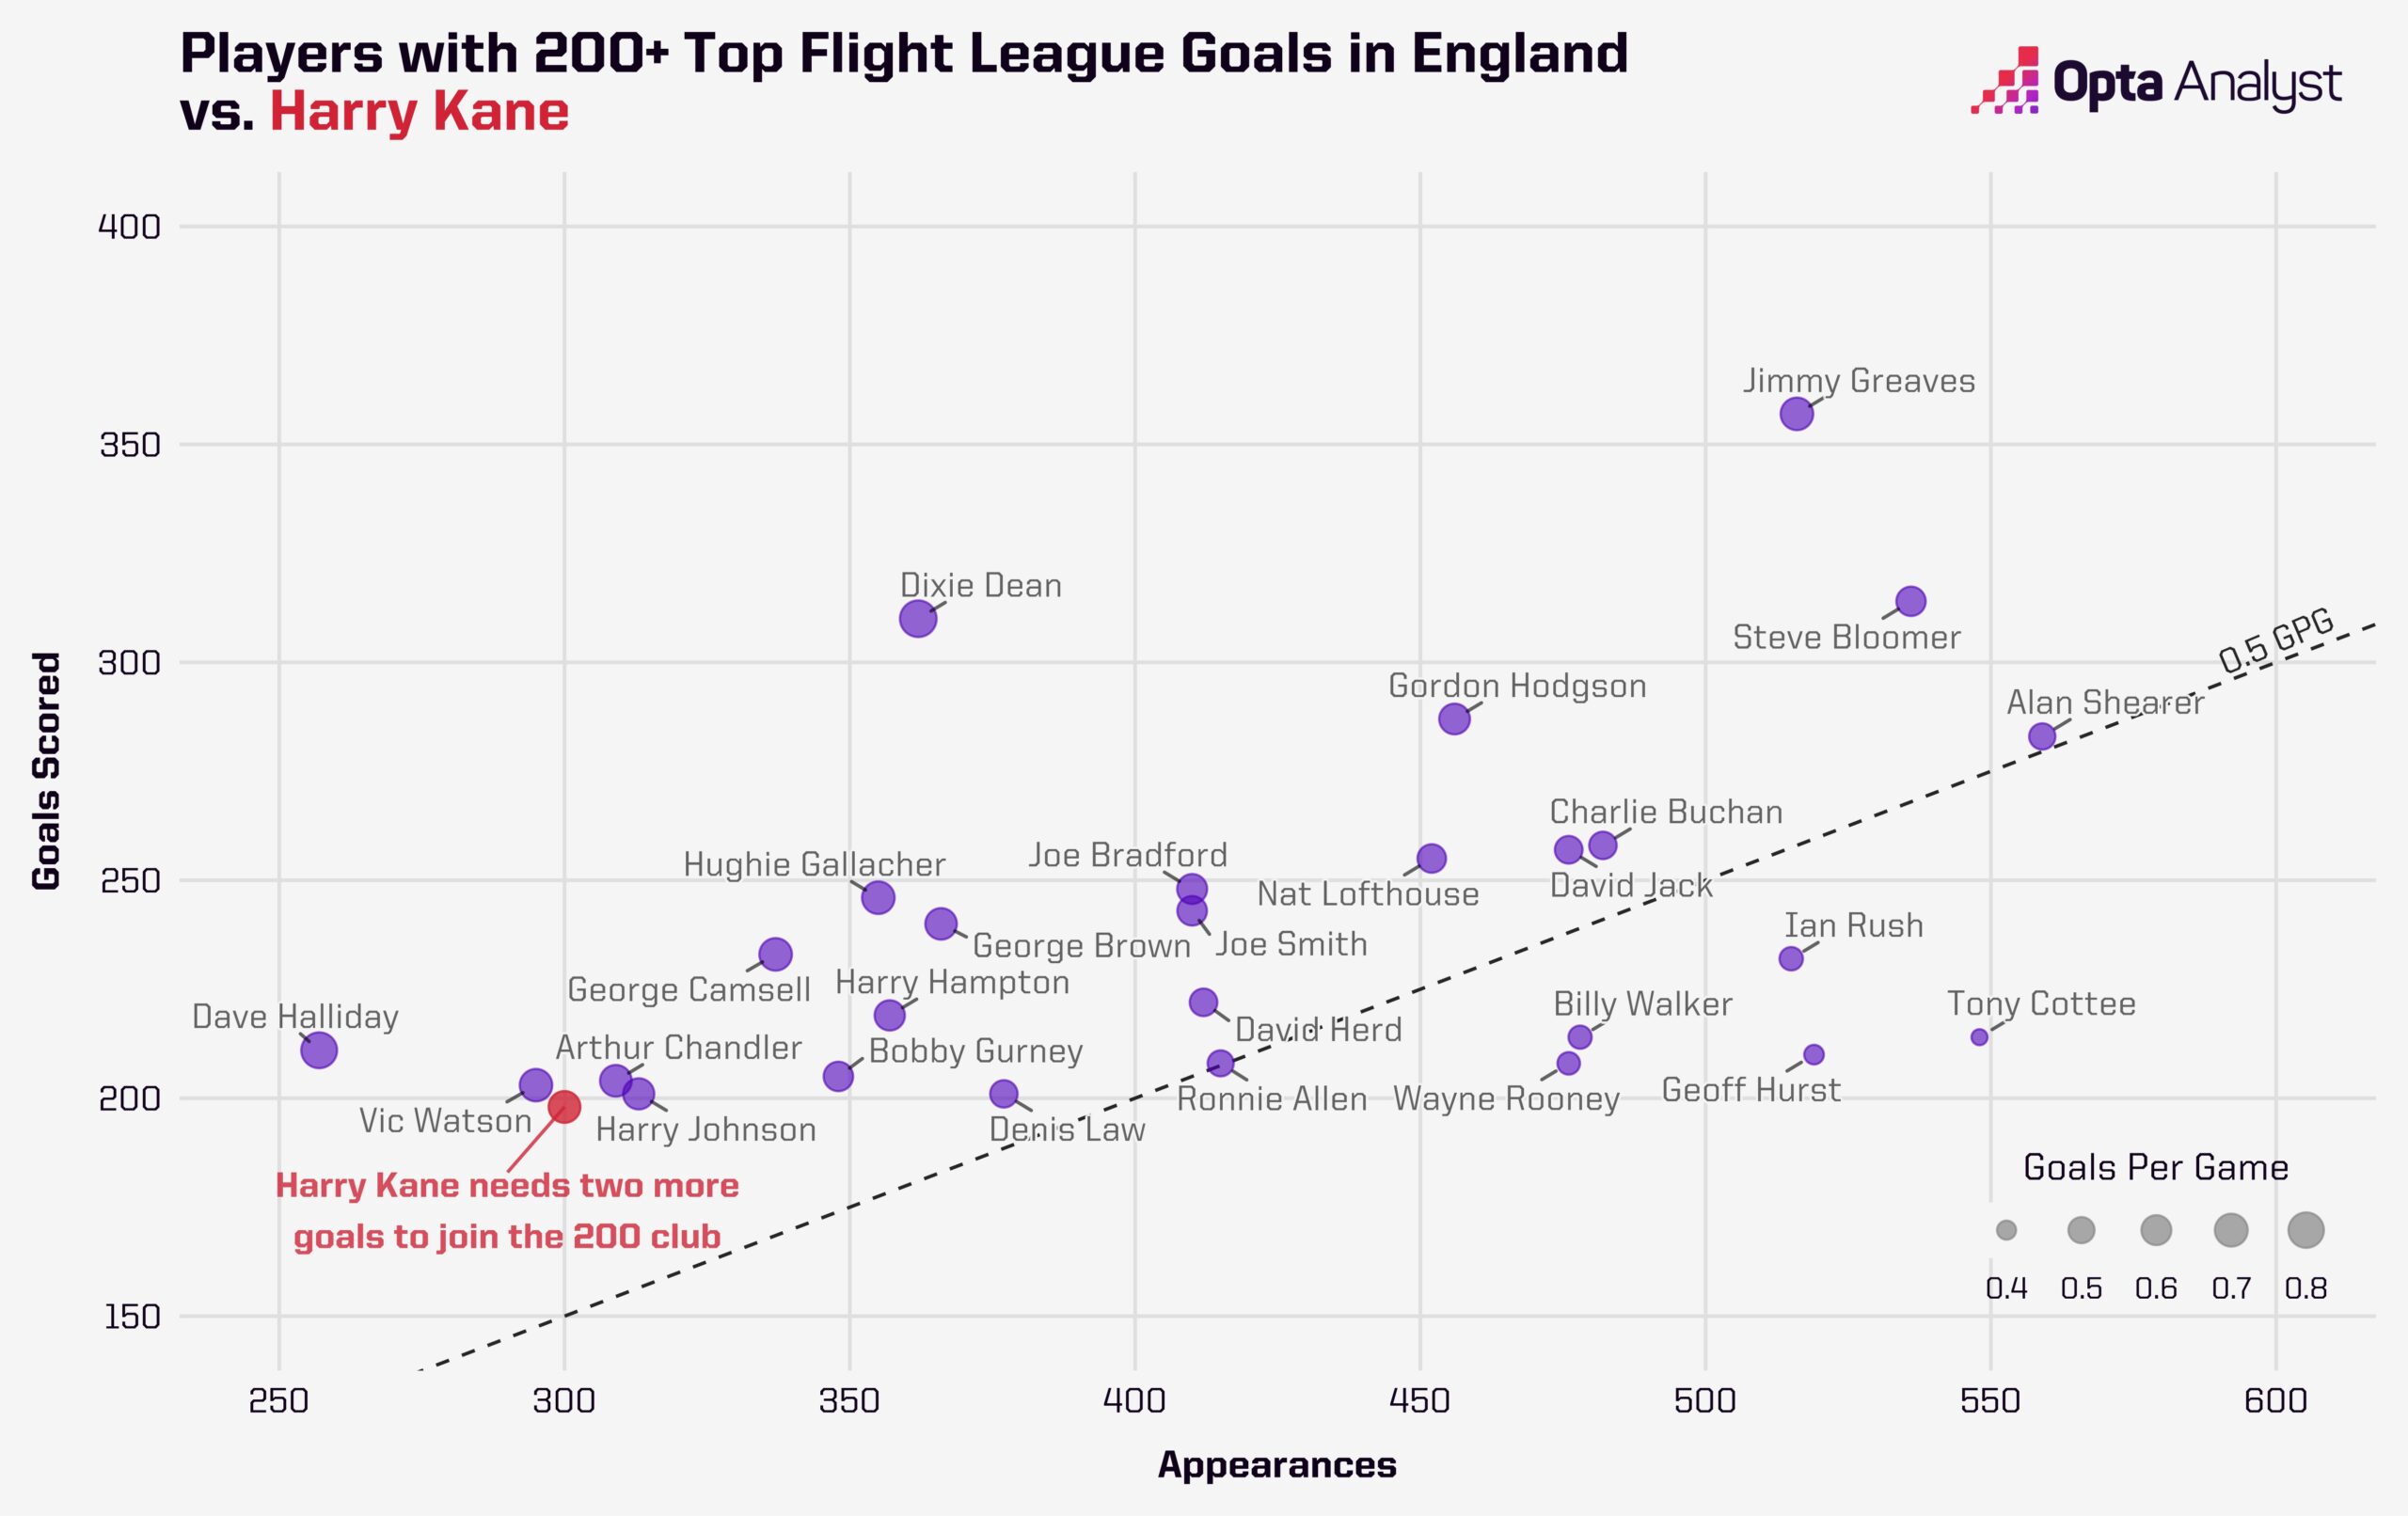 Most English League Goals in the Top Flight